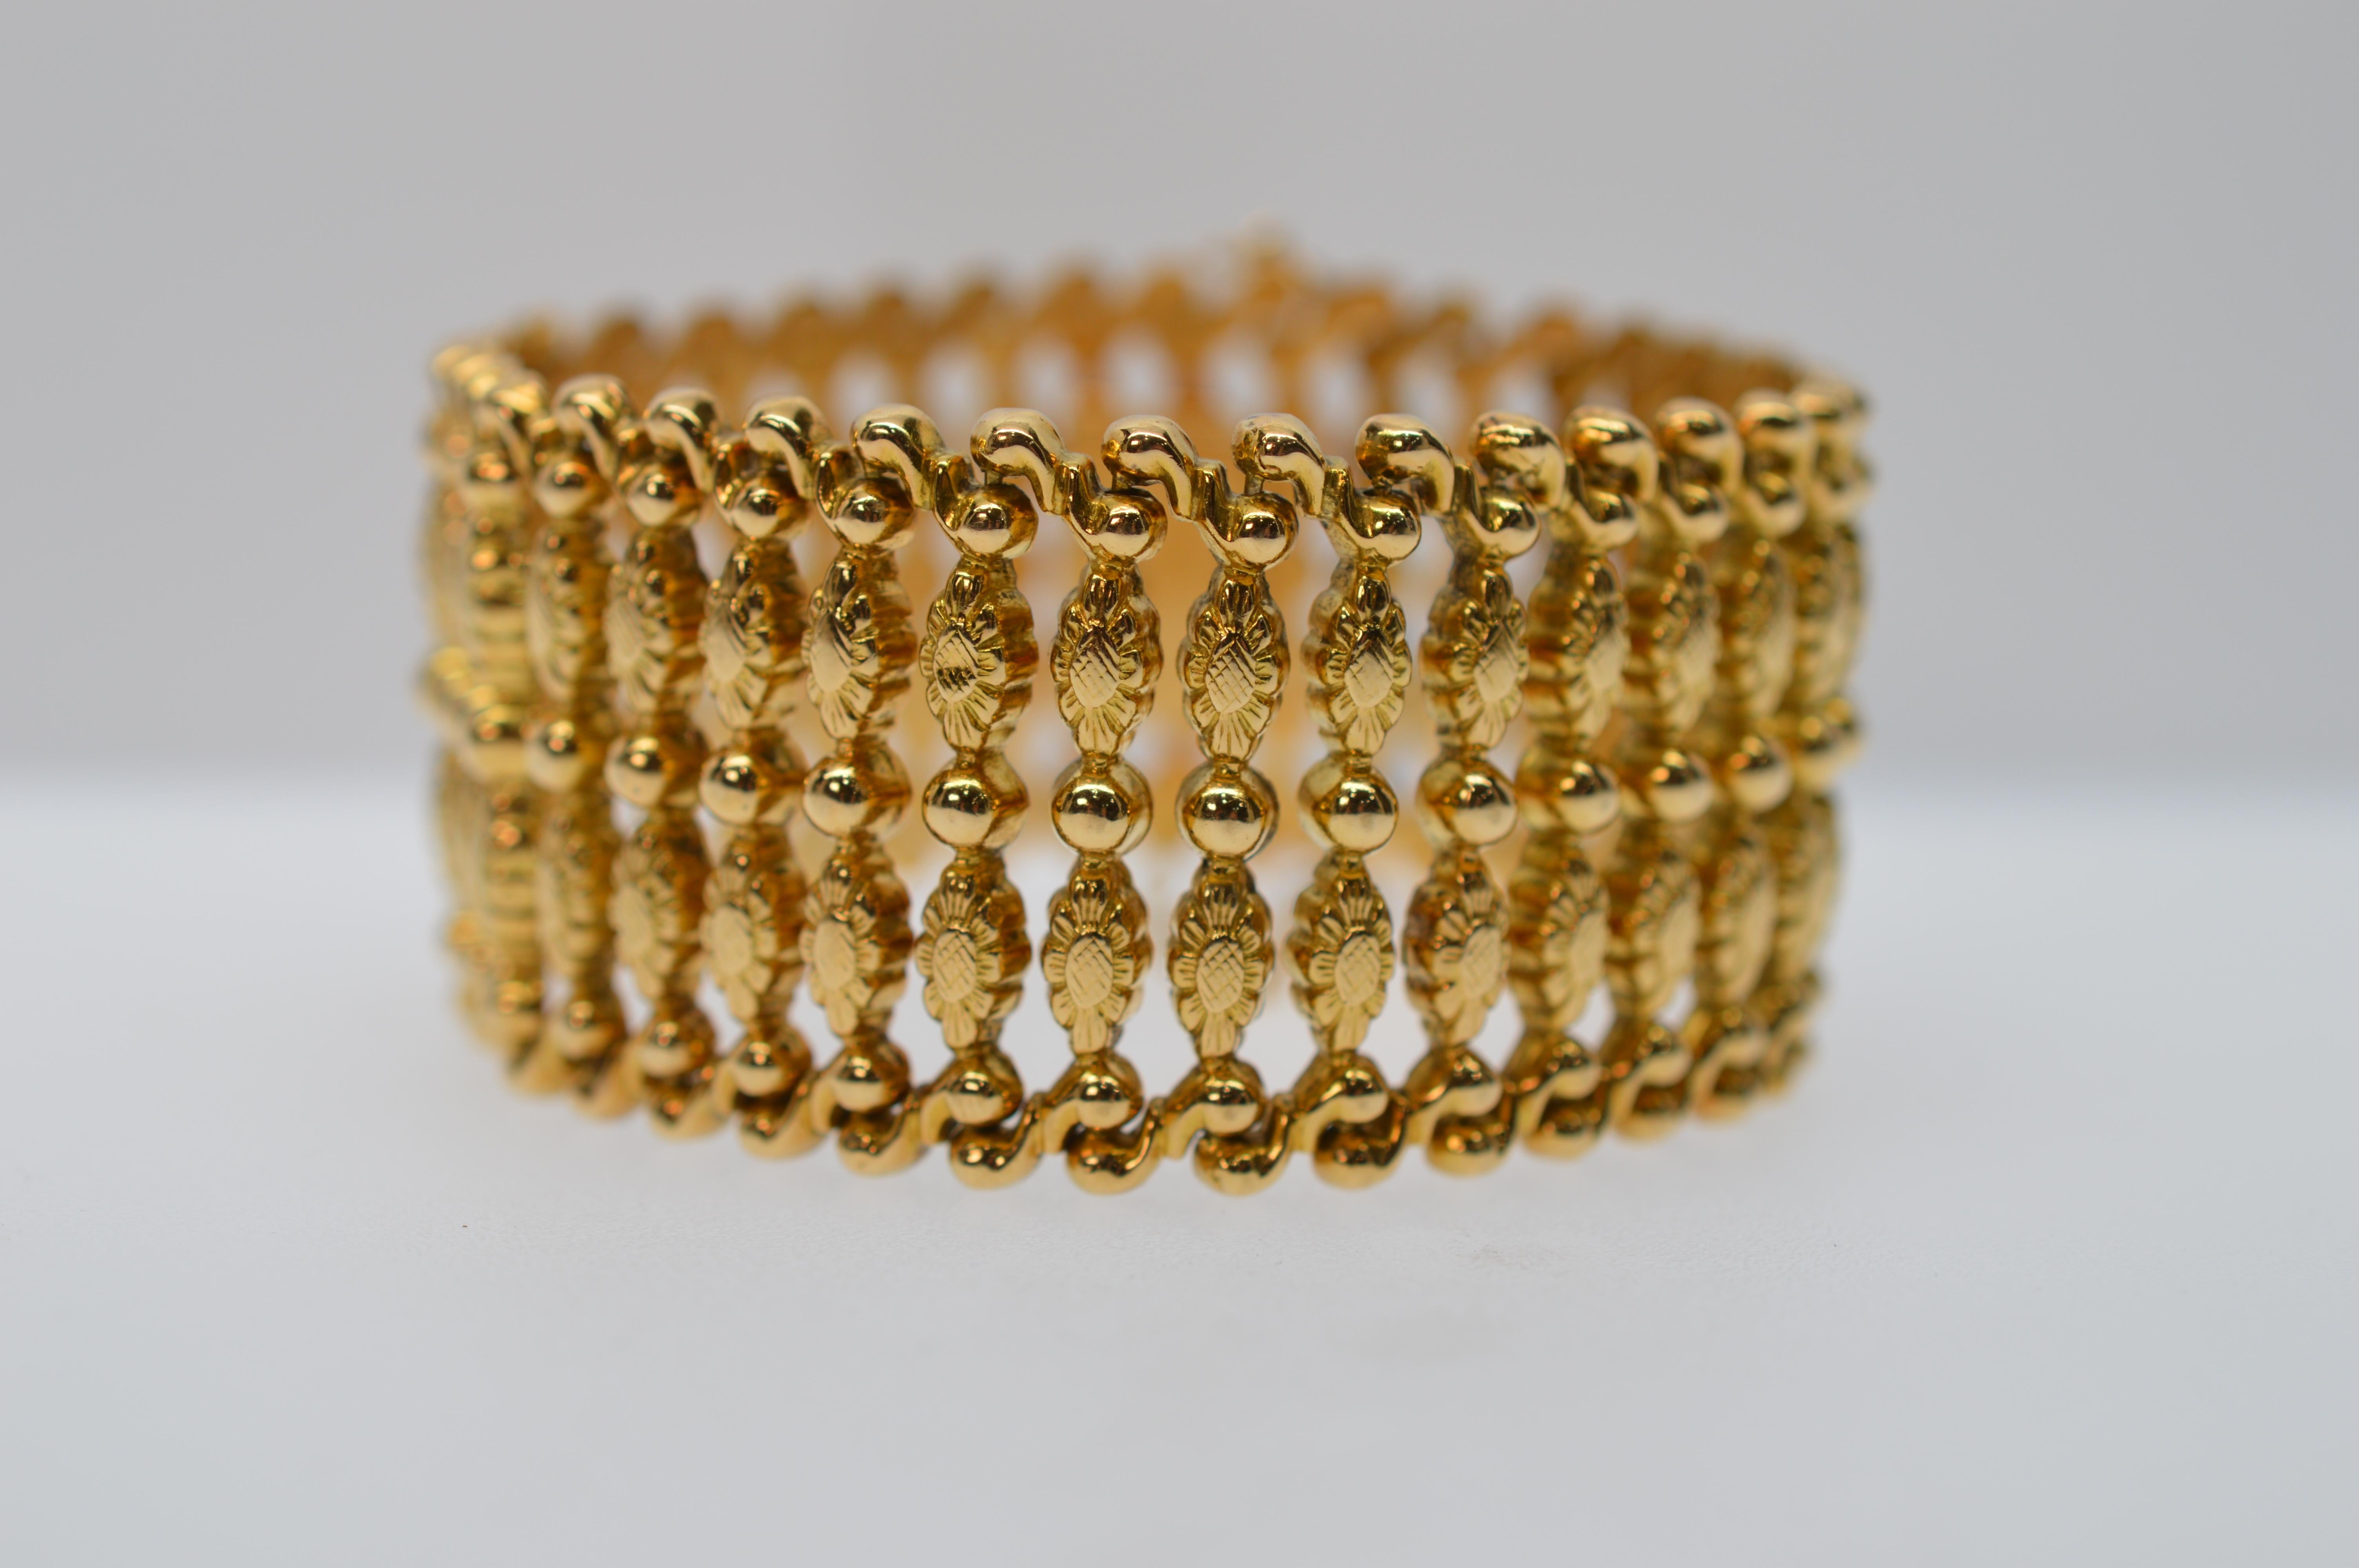 Fabulous circa 1940's in eighteen karat (18K) yellow gold, this retro style ladder bracelet is an undeniable treasure. Measuring 7-1/2 inches long and a remarkable 1-1/4 inches wide, the multiple .750 gold links of this bold piece present a cuff